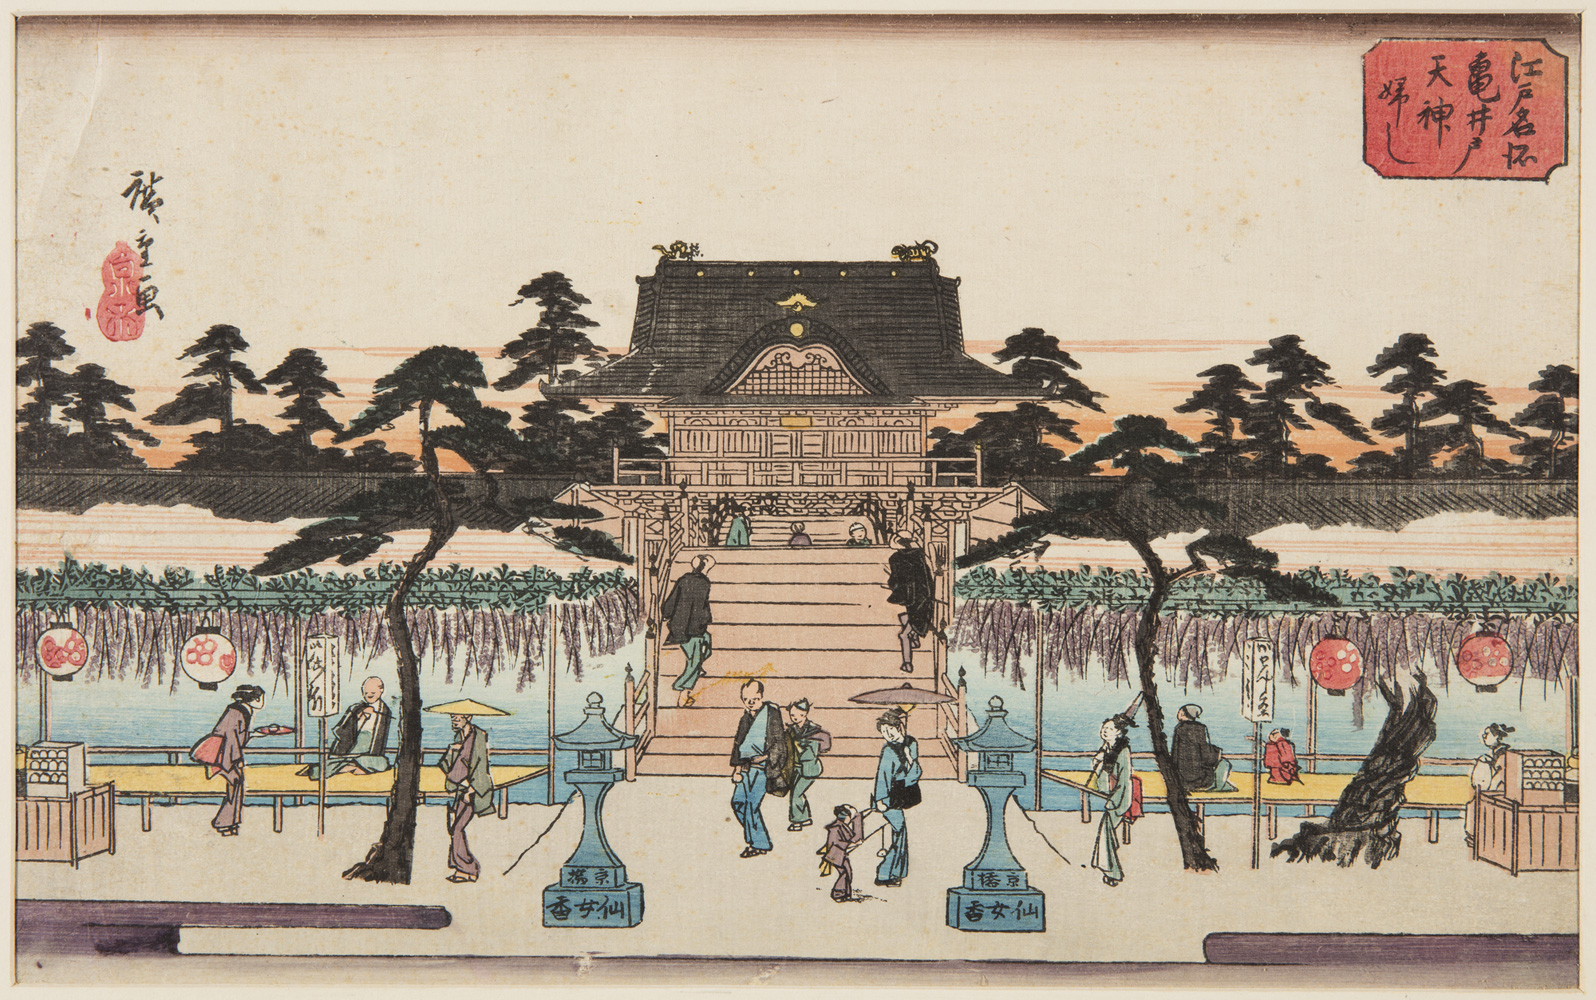 Japanese print of a garden scene. People, dressed in traditional clothes stroll or sit on platforms next to displays of hanging wisteria, steps lead up to a grand building behind.